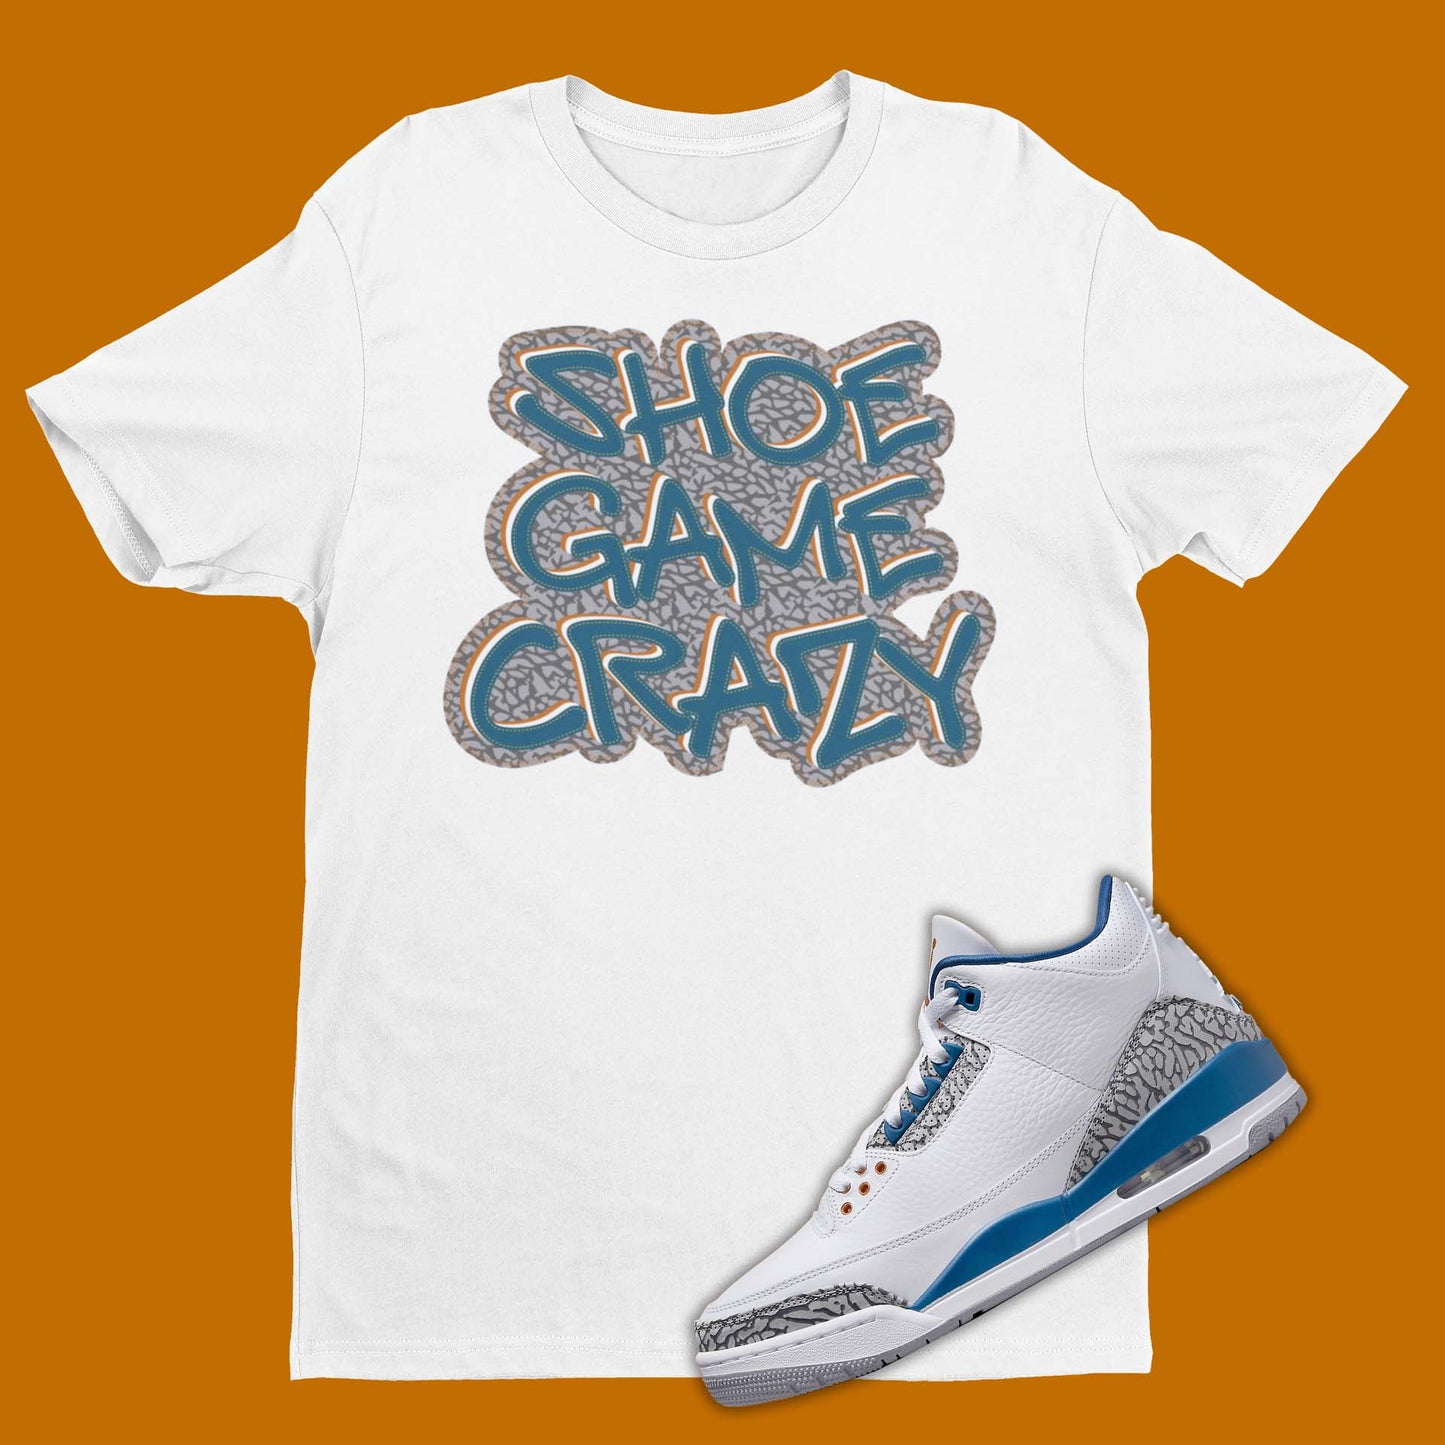 The perfect Shoe Game Crazy shirt to match your sneakers! Our Match Jordan 3 t-shirt is made to compliment your kicks. Bring your sneakers to the next level with this Wizards Air Jordan 3 shirt. Match and feel trendy with this graphic tee!